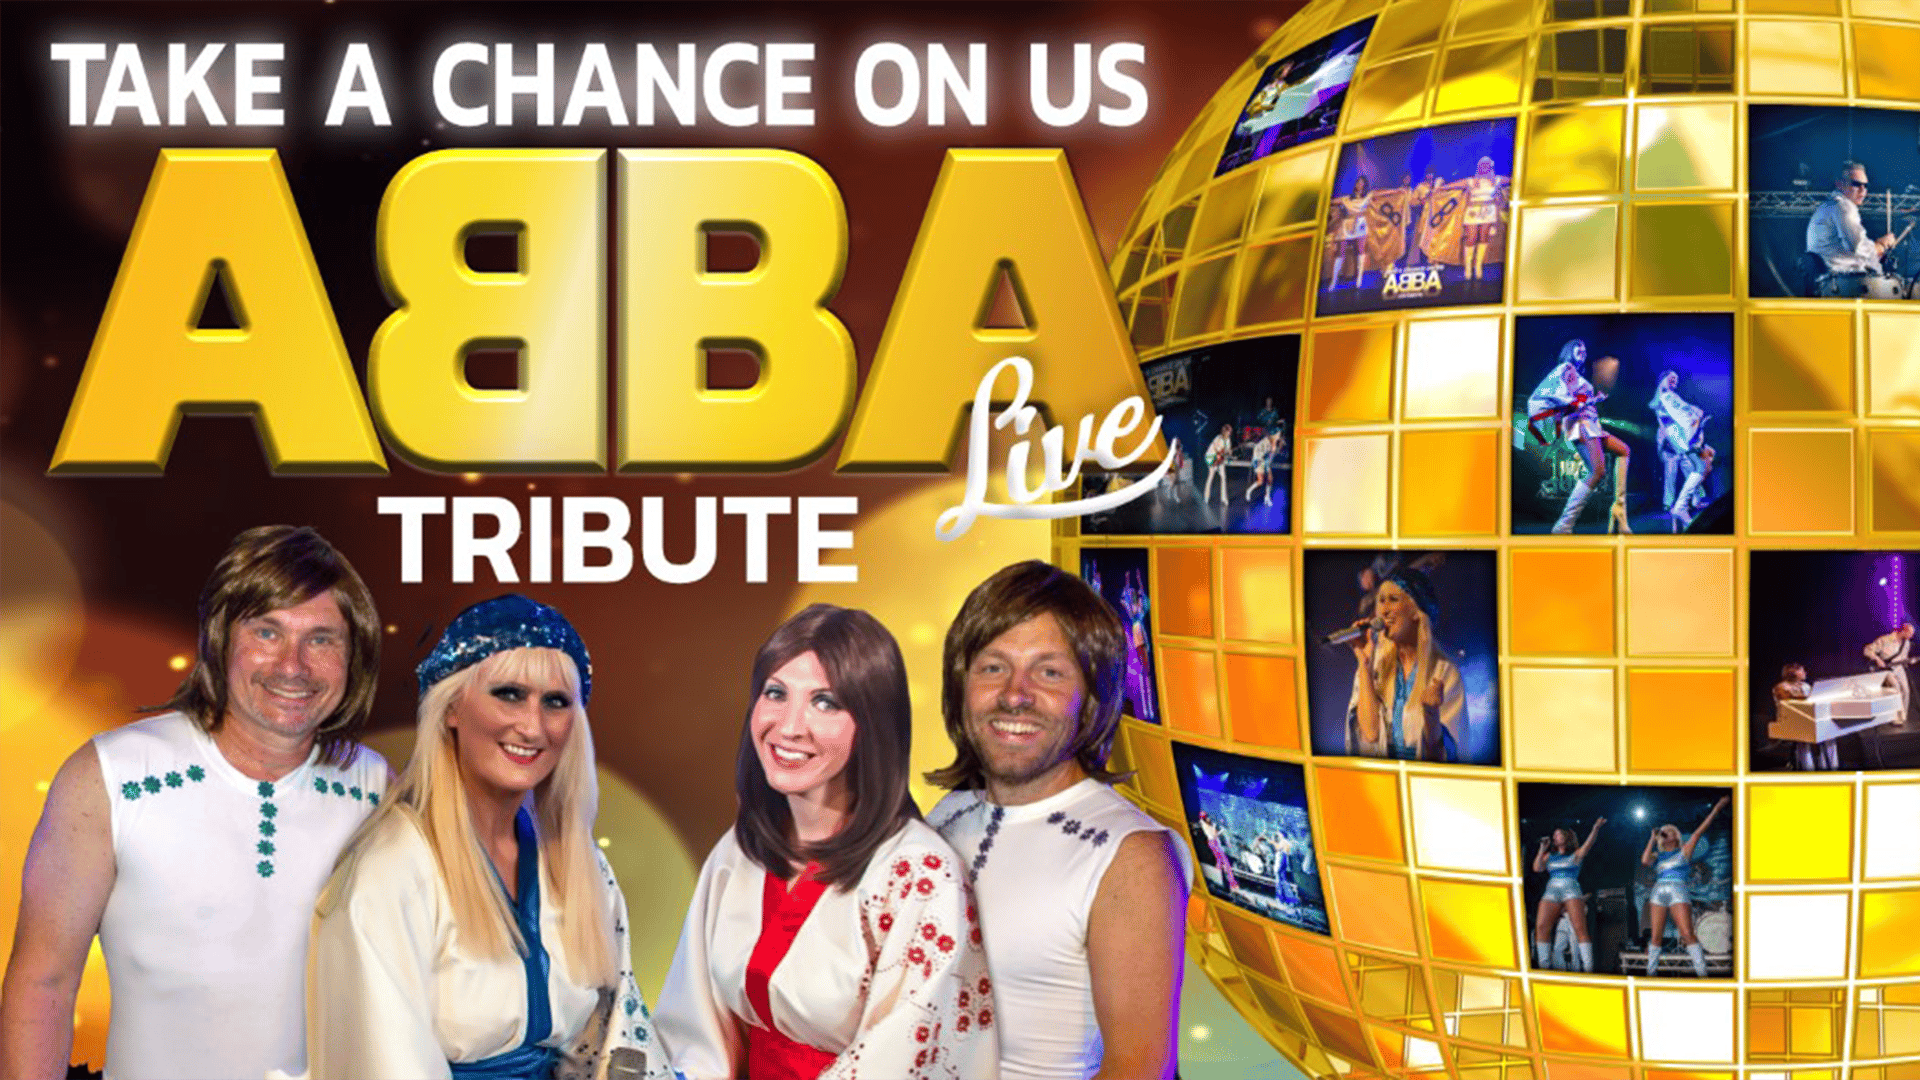 Take A Chance On Us Abba Live Tribute artwork – two men and two women dressed as the four members of Abba stand in front of a smoke-filled golden background beside a large disco ball featuring images from their live performances